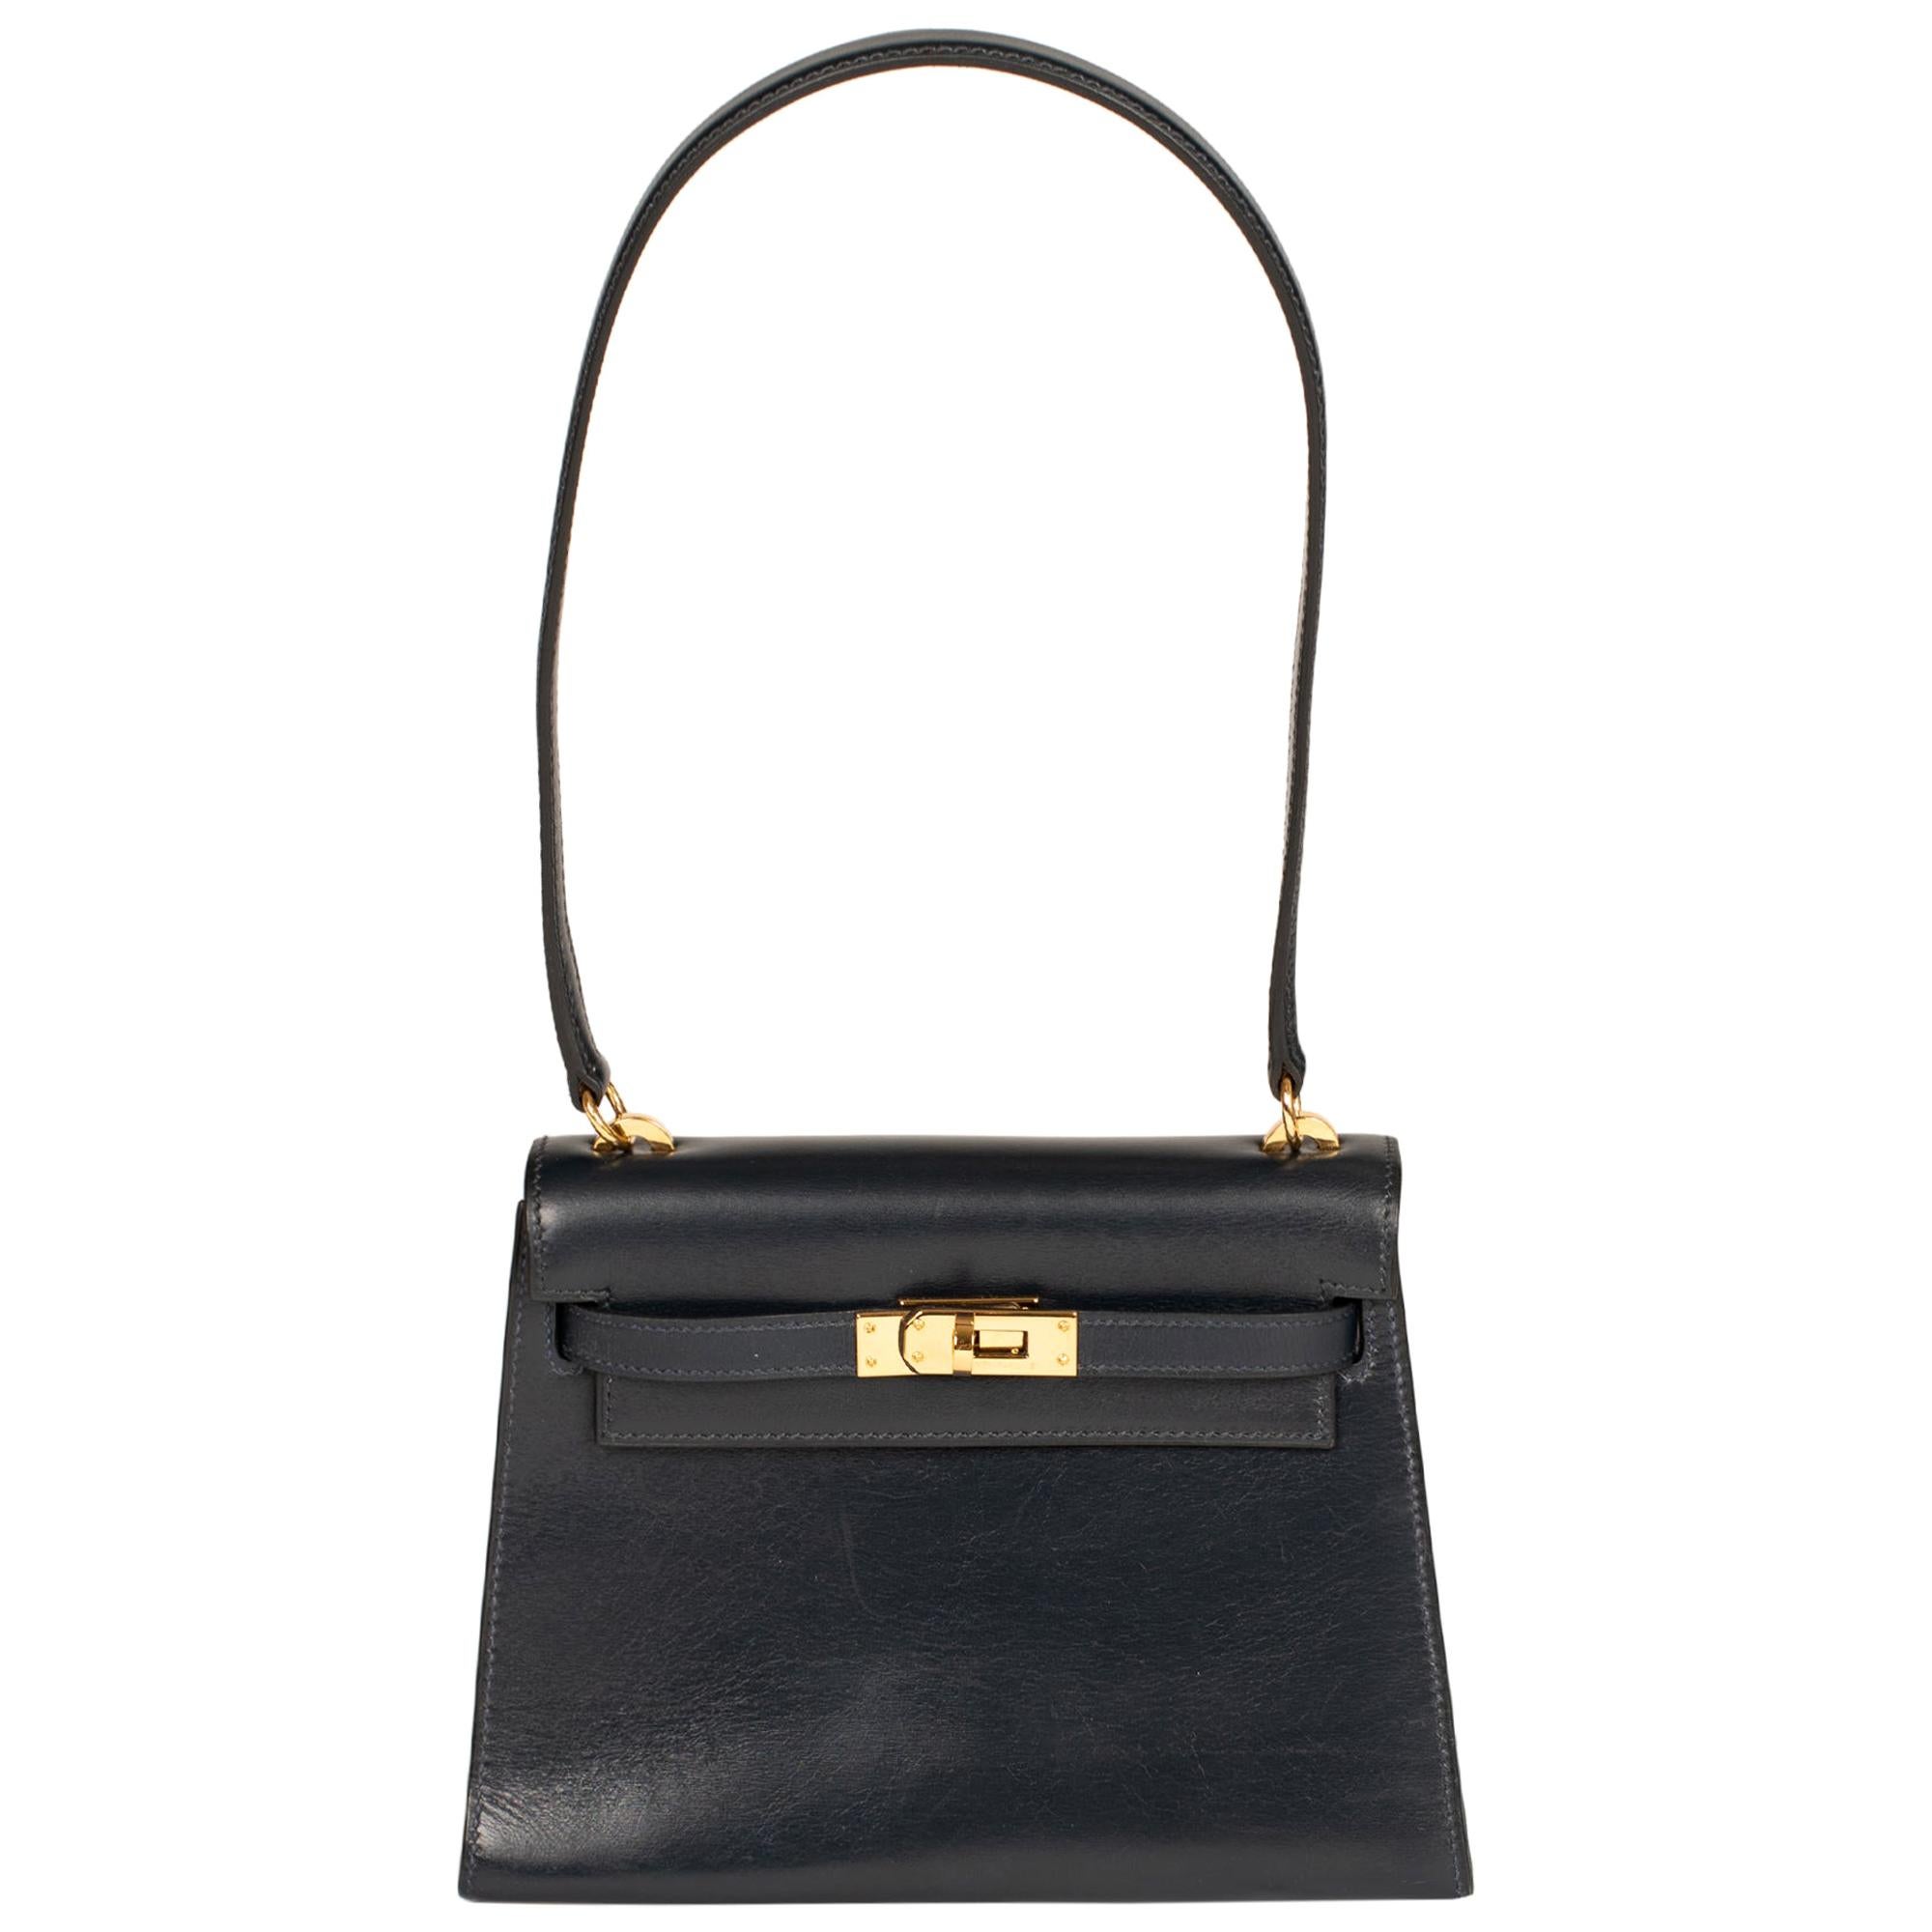 Amazing & Rare Hermès Mini Kelly 20cm in blue navy calfskin and gold hardware